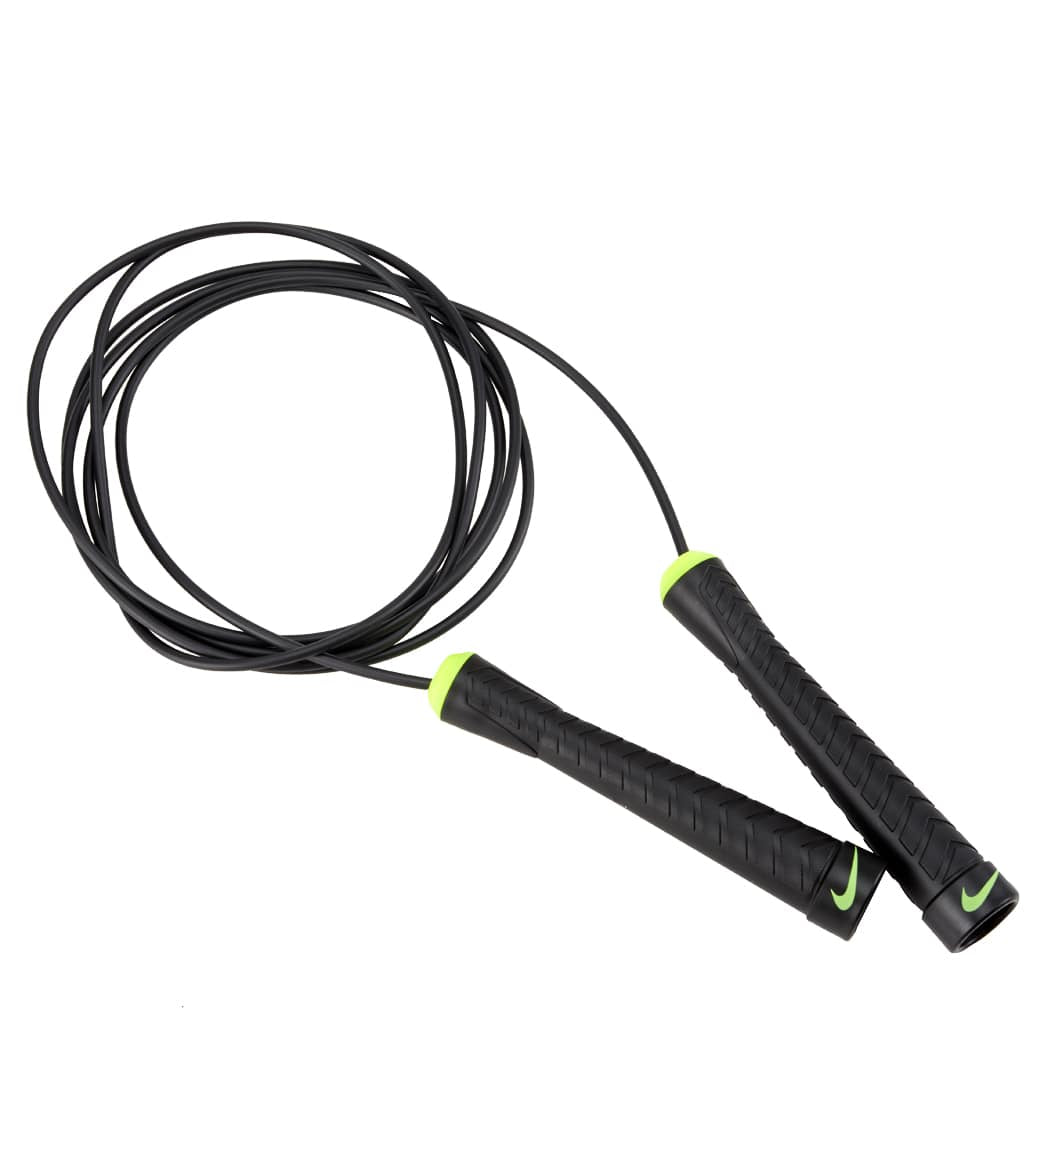 Nike Fundamental Speed Rope at SwimOutlet.com